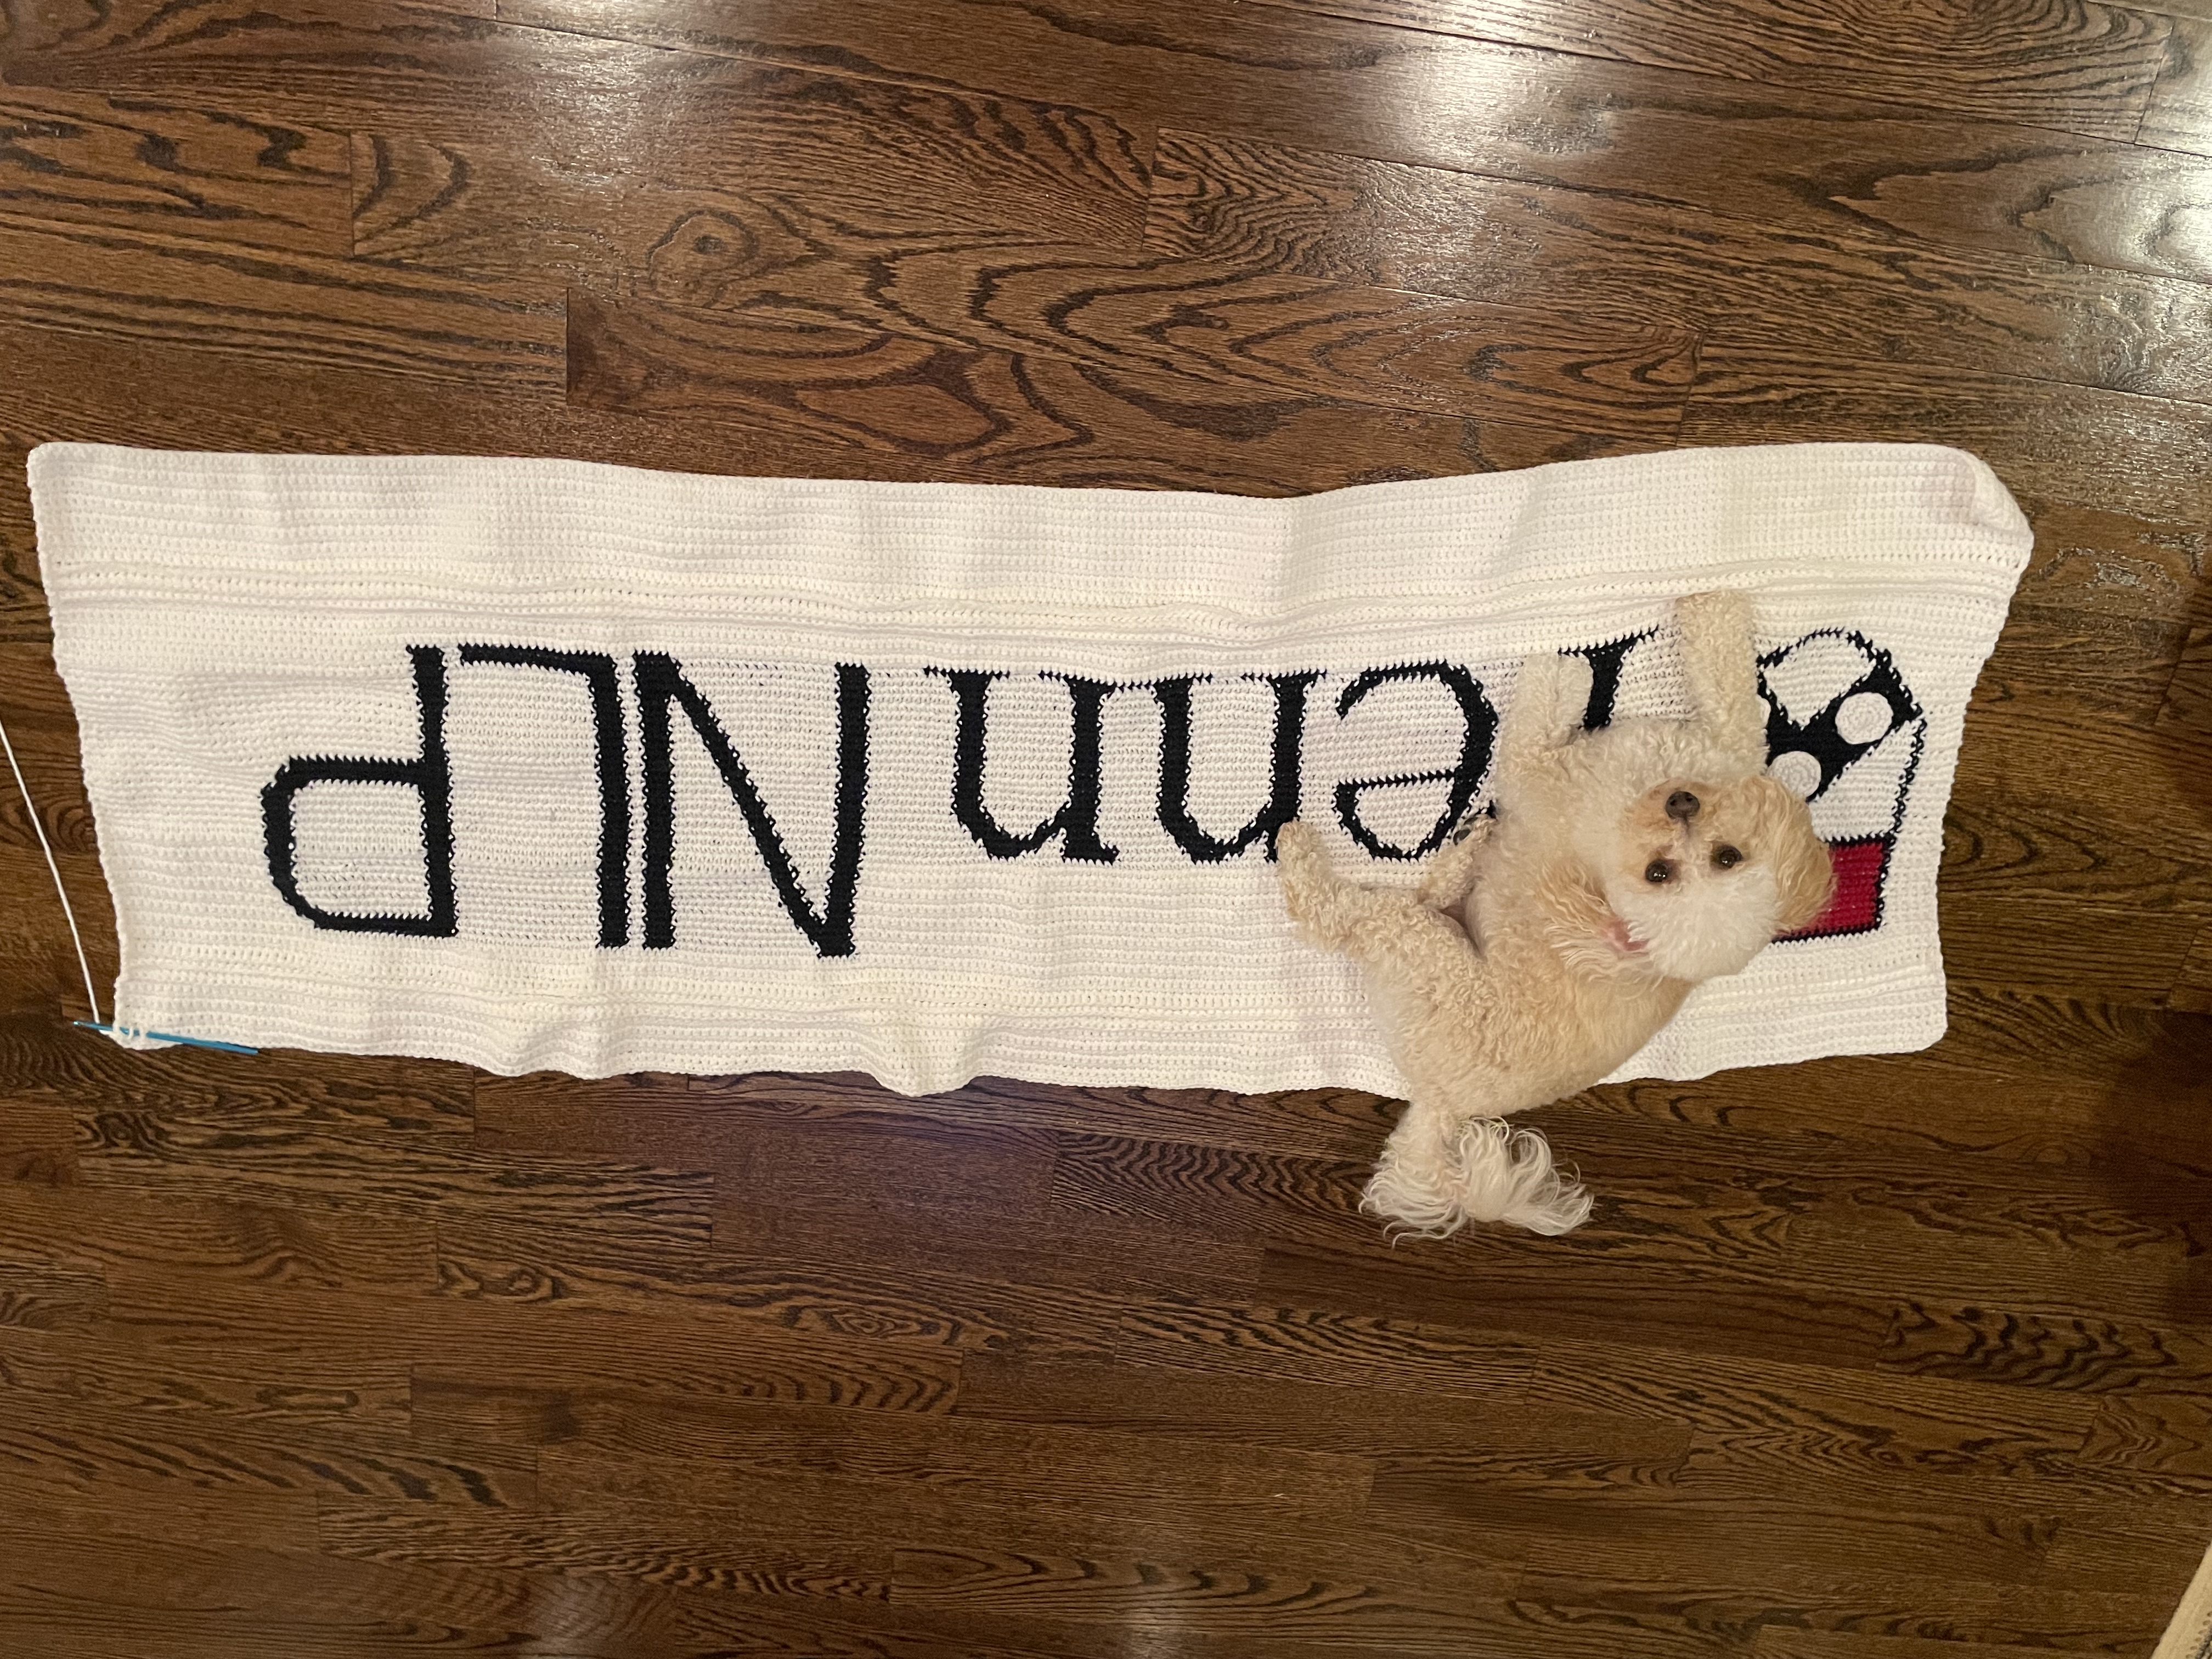 A white crocheted lap blanket with the Penn NLP logo. My small fluffy dog Bella is lying on top, looking relatively unimpressed.